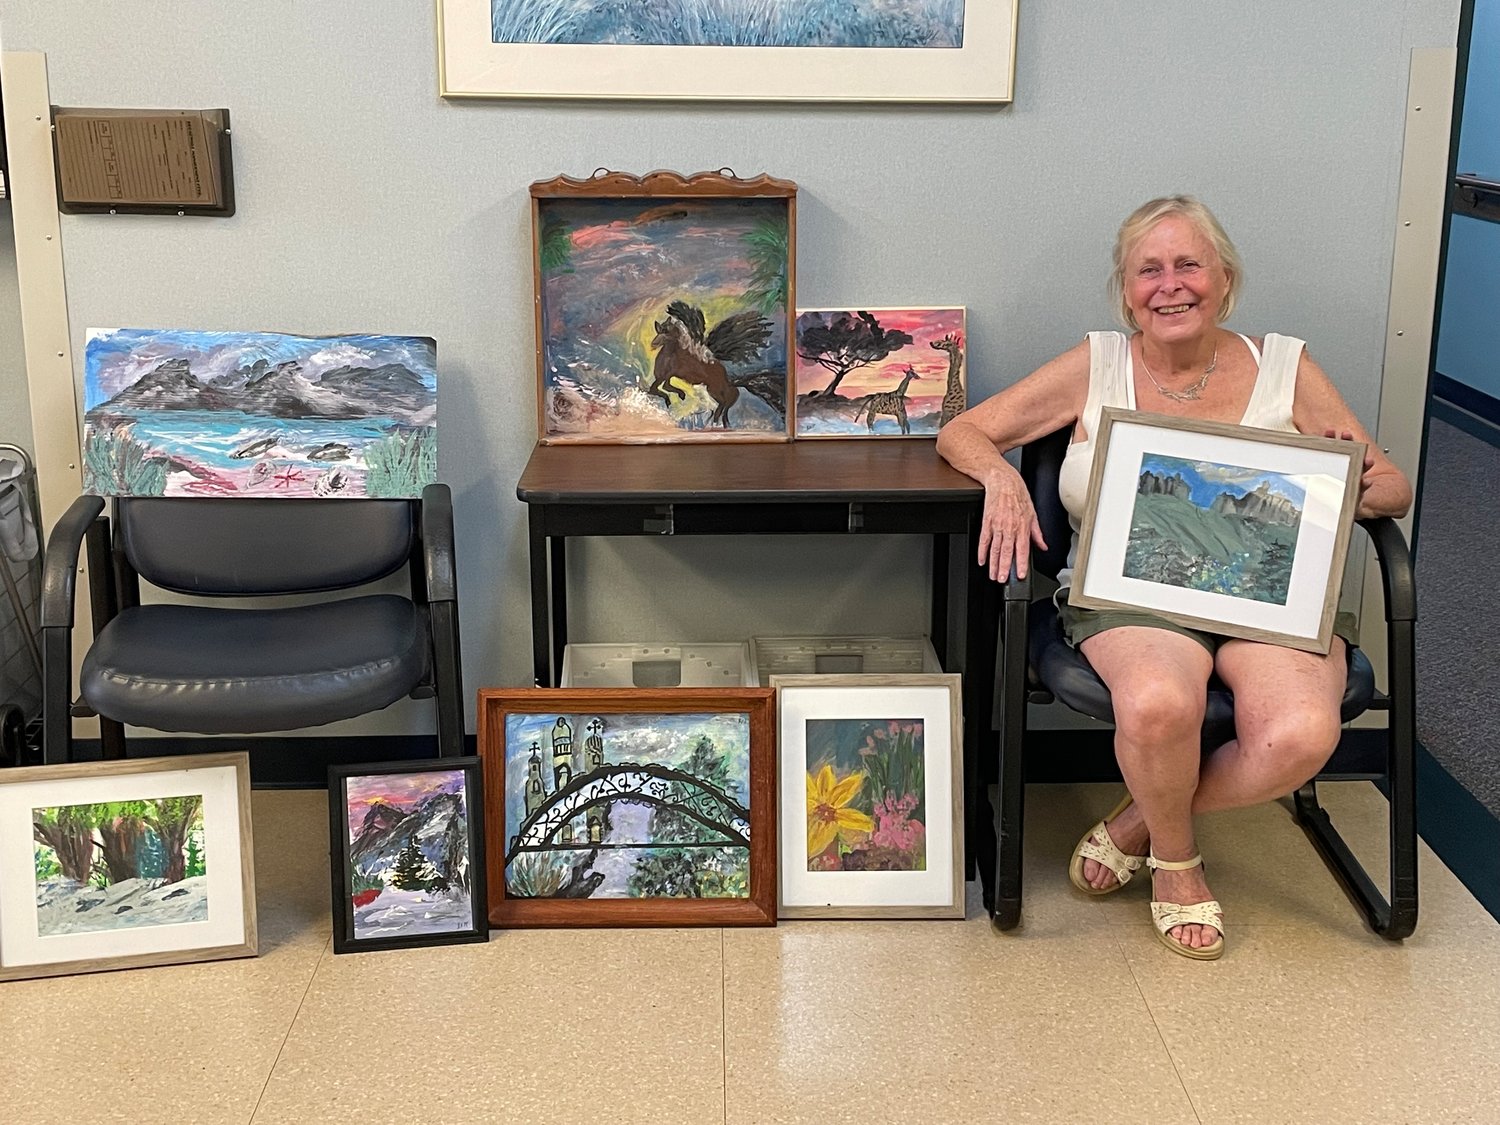 Though Rockville Centre resident Rita Meury, 74, is visually impaired, she has a knack for painting, and used her skill to help others stay positive during the coronavirus pandemic.